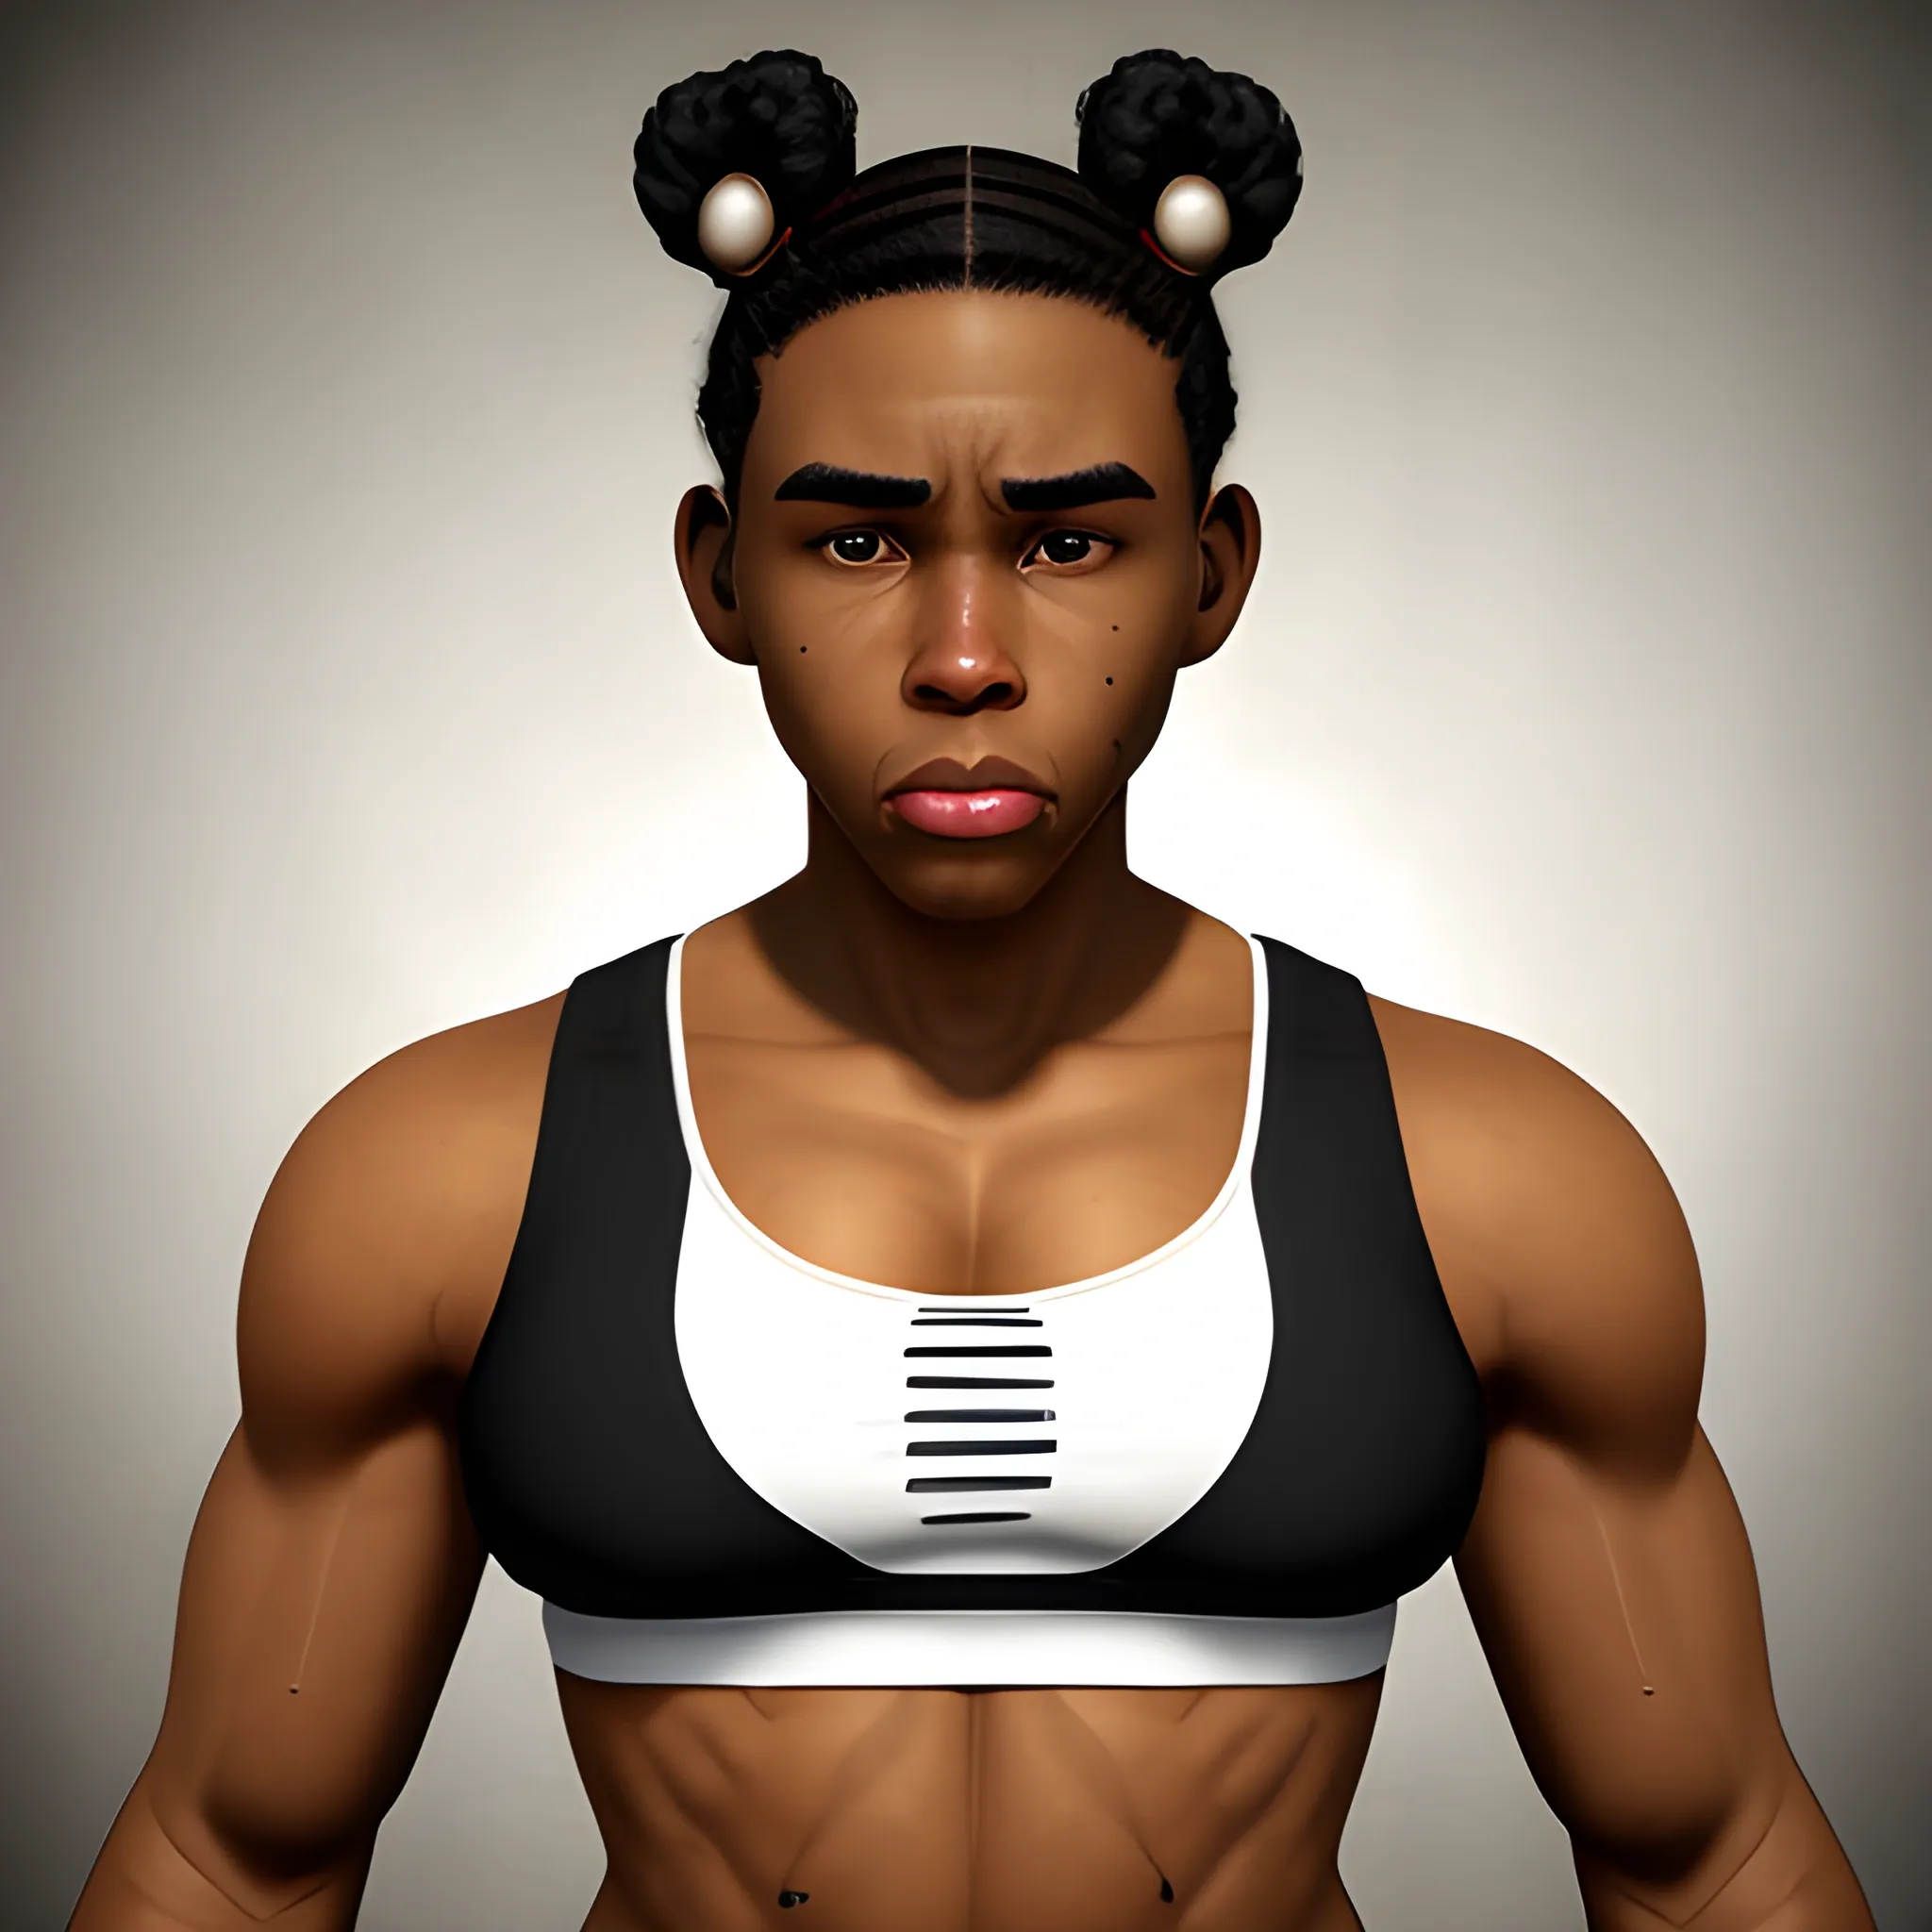 In the style of fallout 1, (masterpiece), (portrait photography), (portrait of an adult African-American feminine male), no makeup, flat chested, white sports bra, bun hairstyle, black curly hair, black hair, brown eyes, sloped shoulders, fit body, full lips, strong jaw, round button nose, cat ears